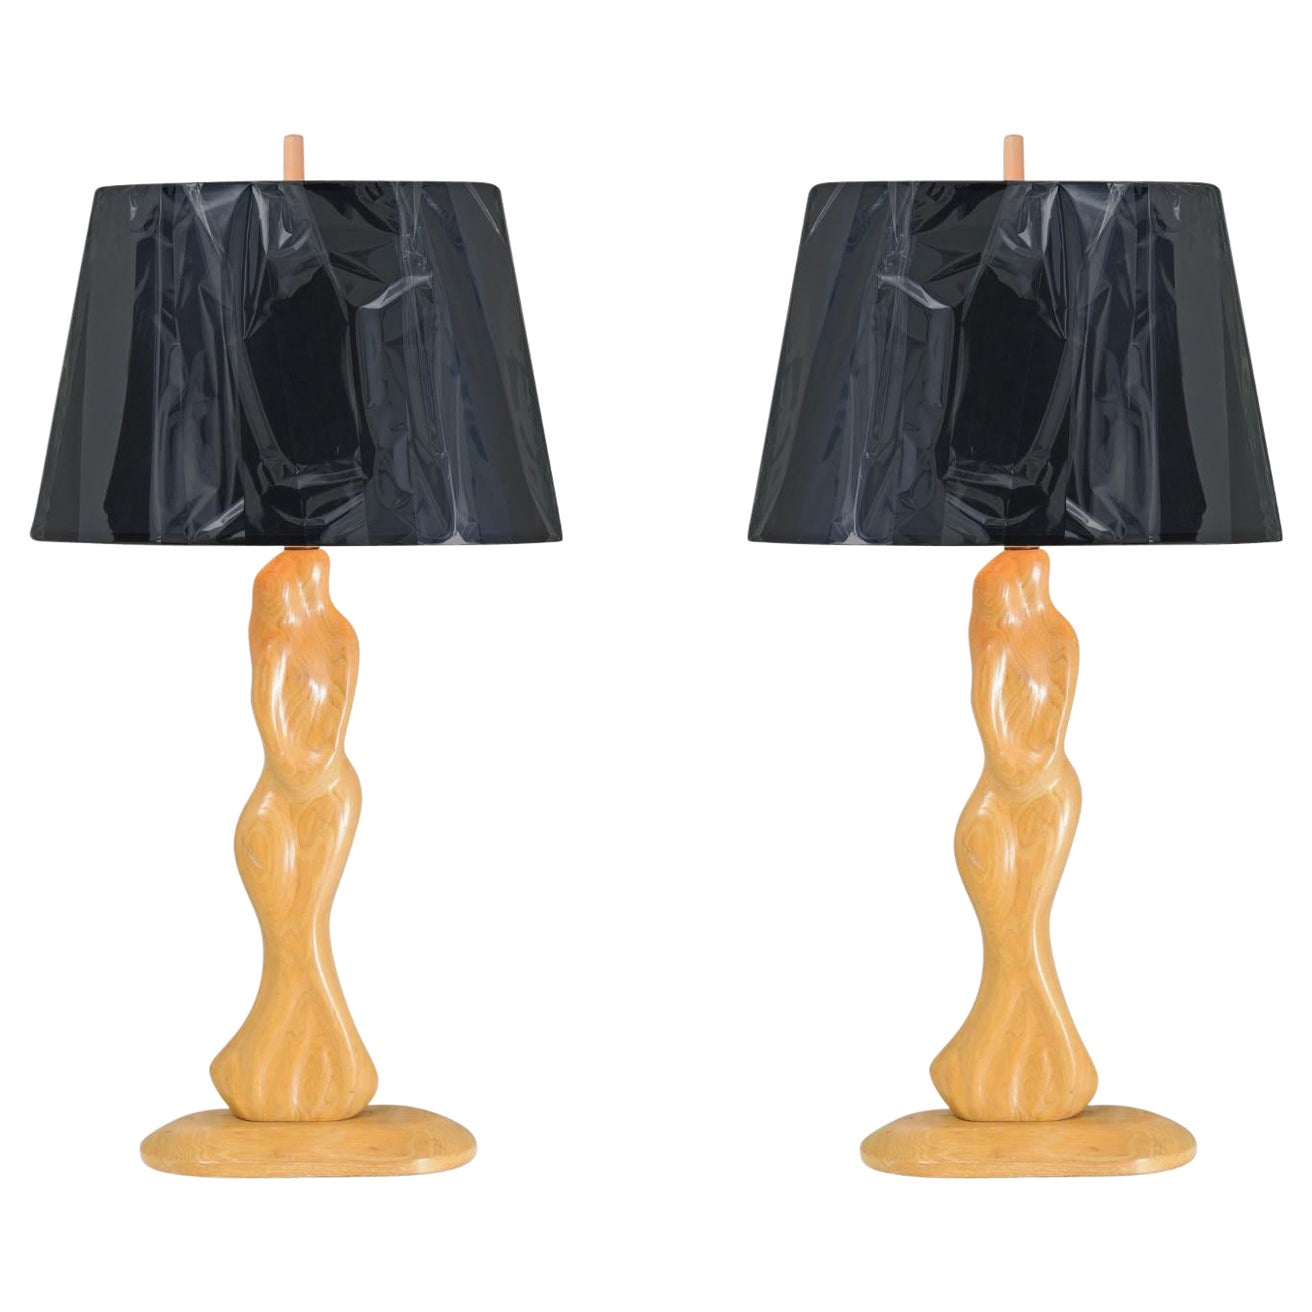 Exquisite Restored Pair of Hand-Carved "Lovers" Lamps by Heifetz, circa 1950